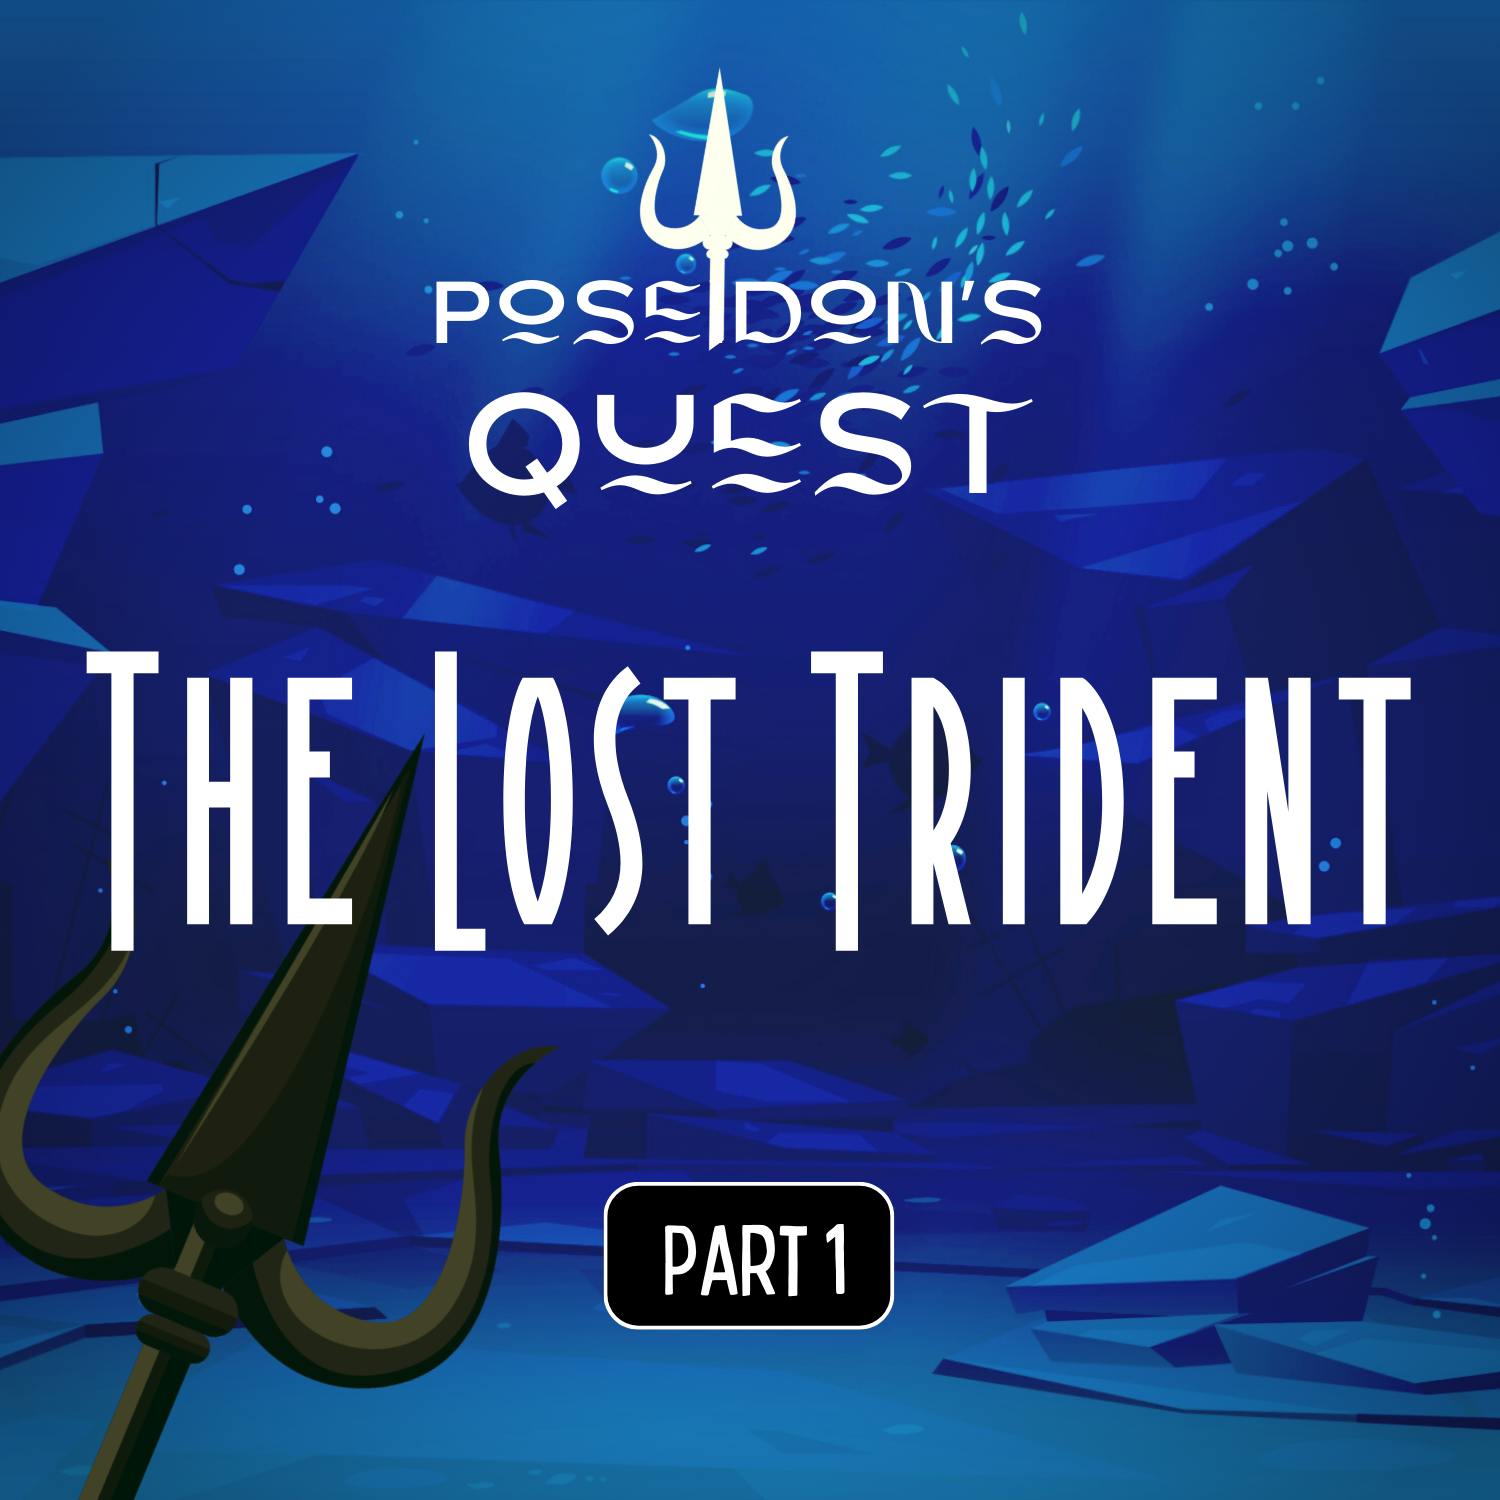 Poseidon's Quest, Part 1: The Lost Trident